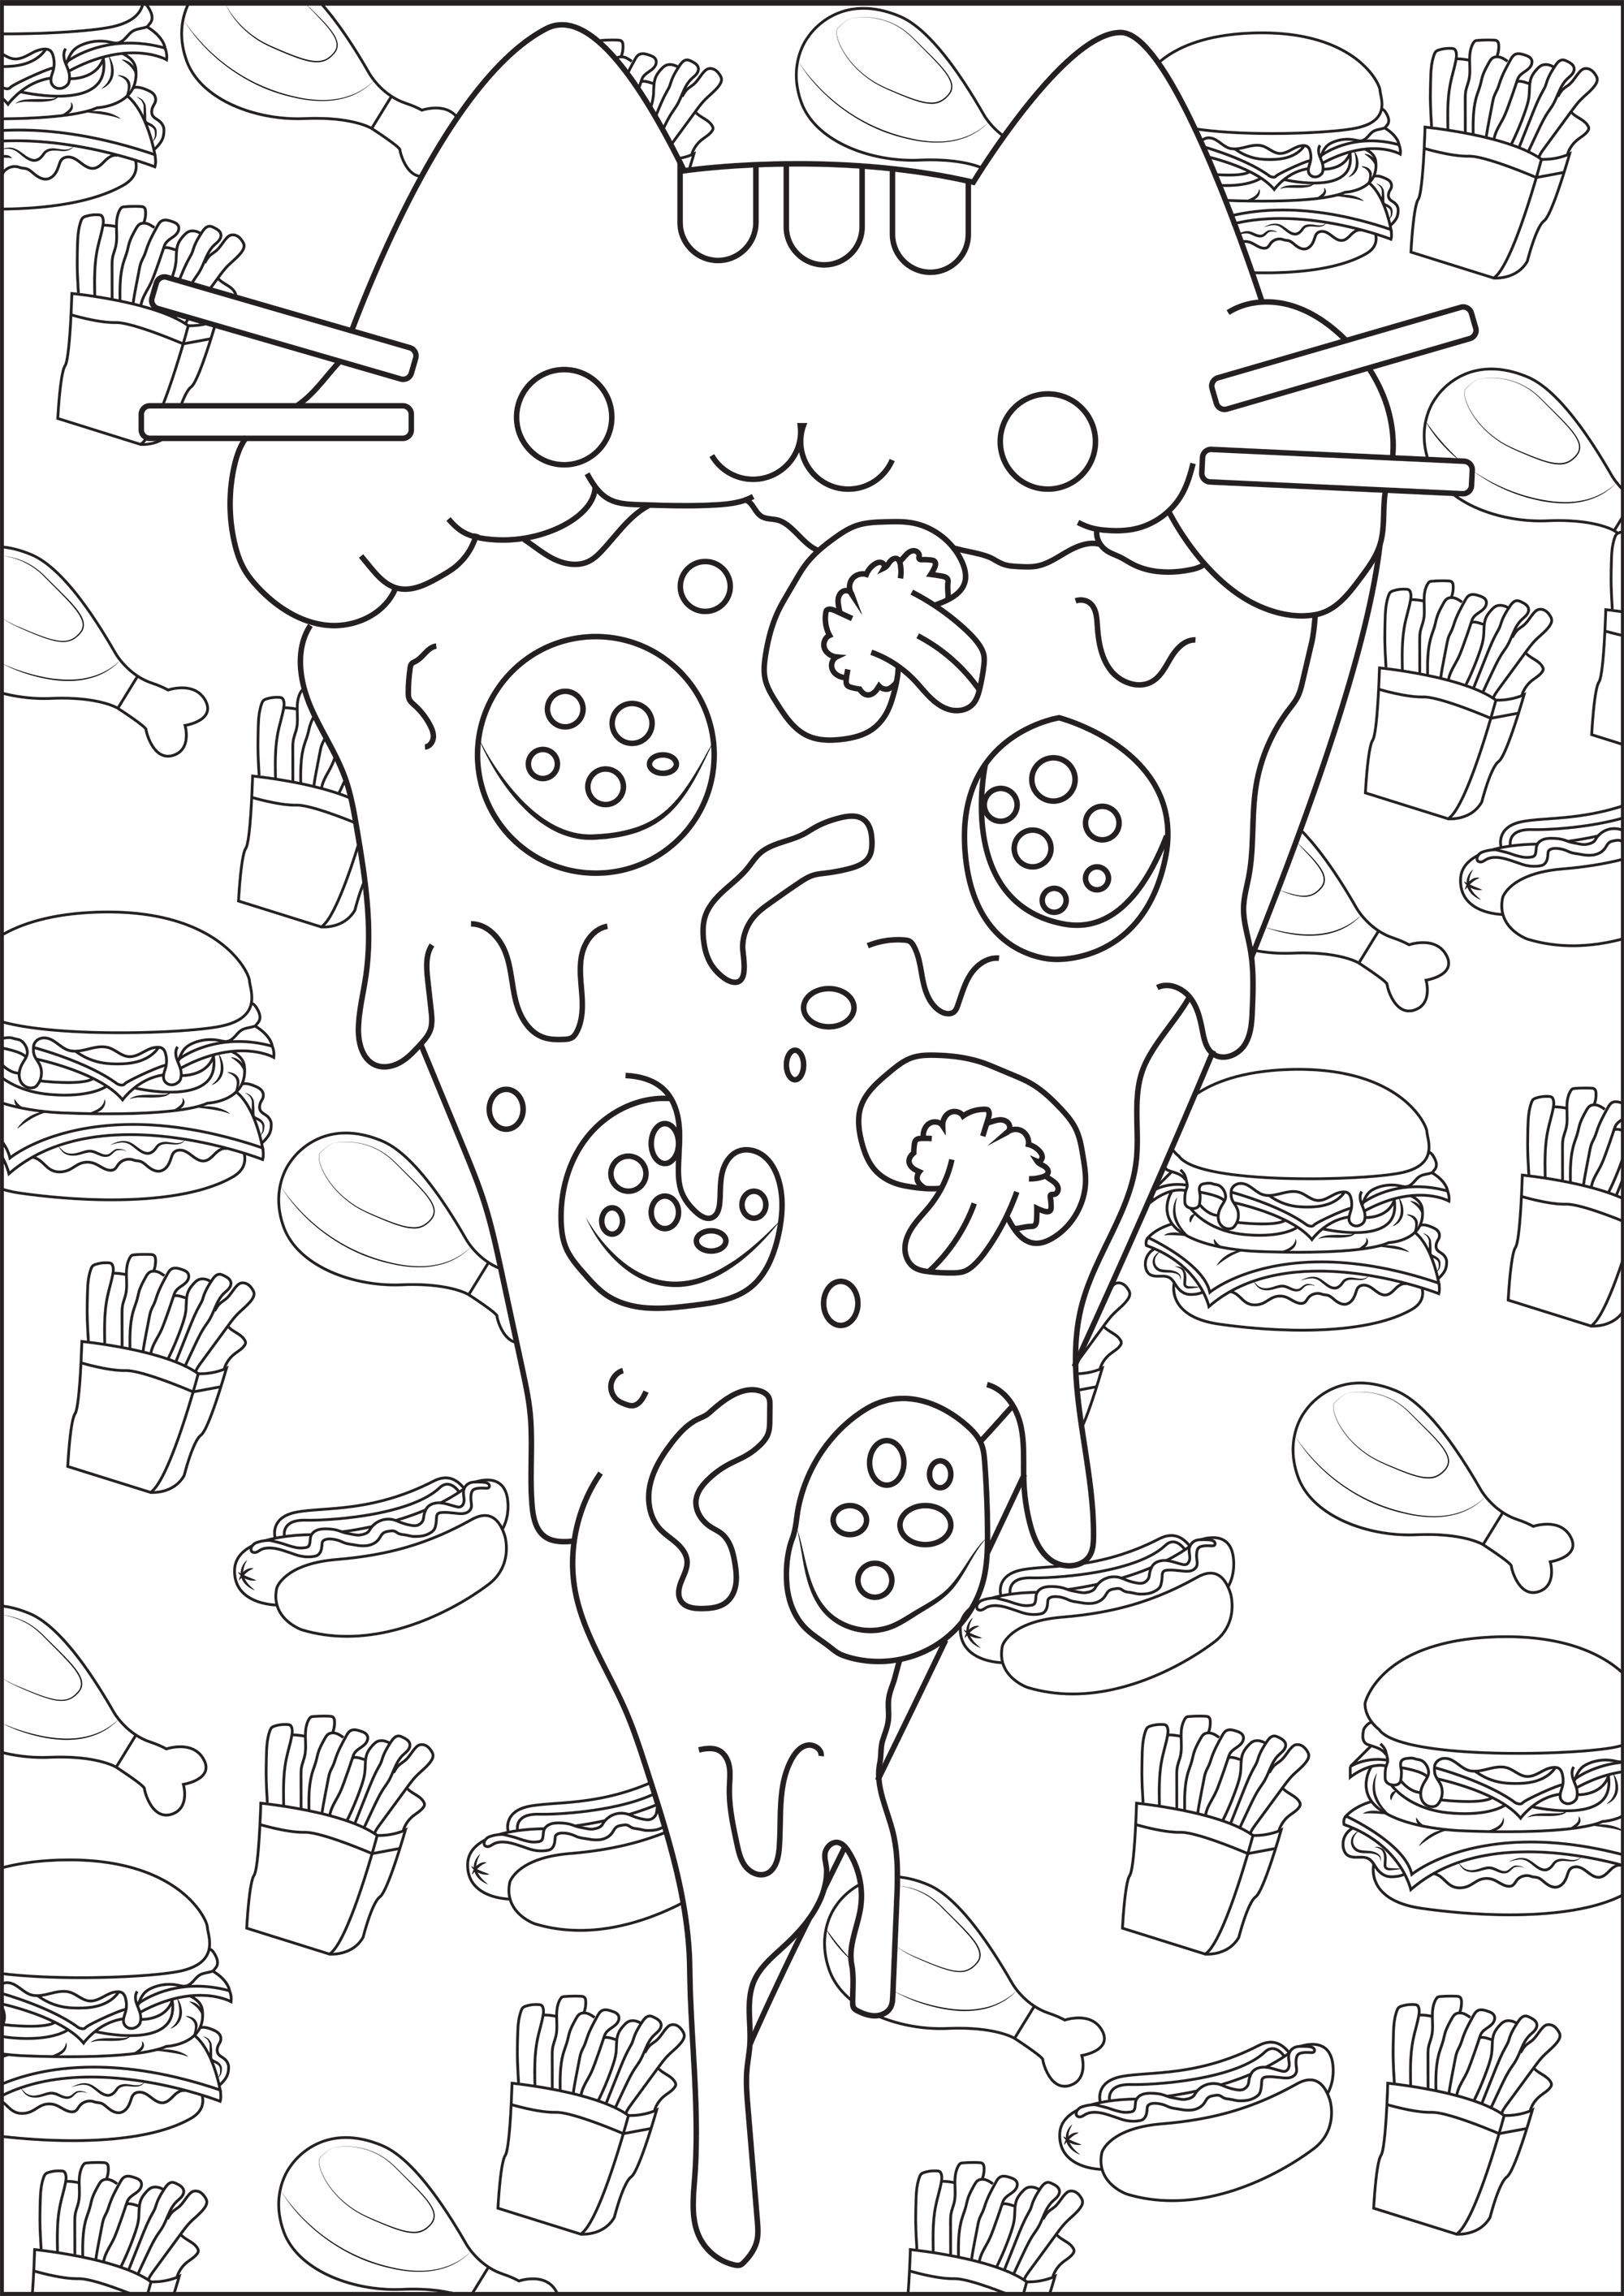 Color this Pusheen pizza, with a background full of junk food stuffs, Artist : Caillou